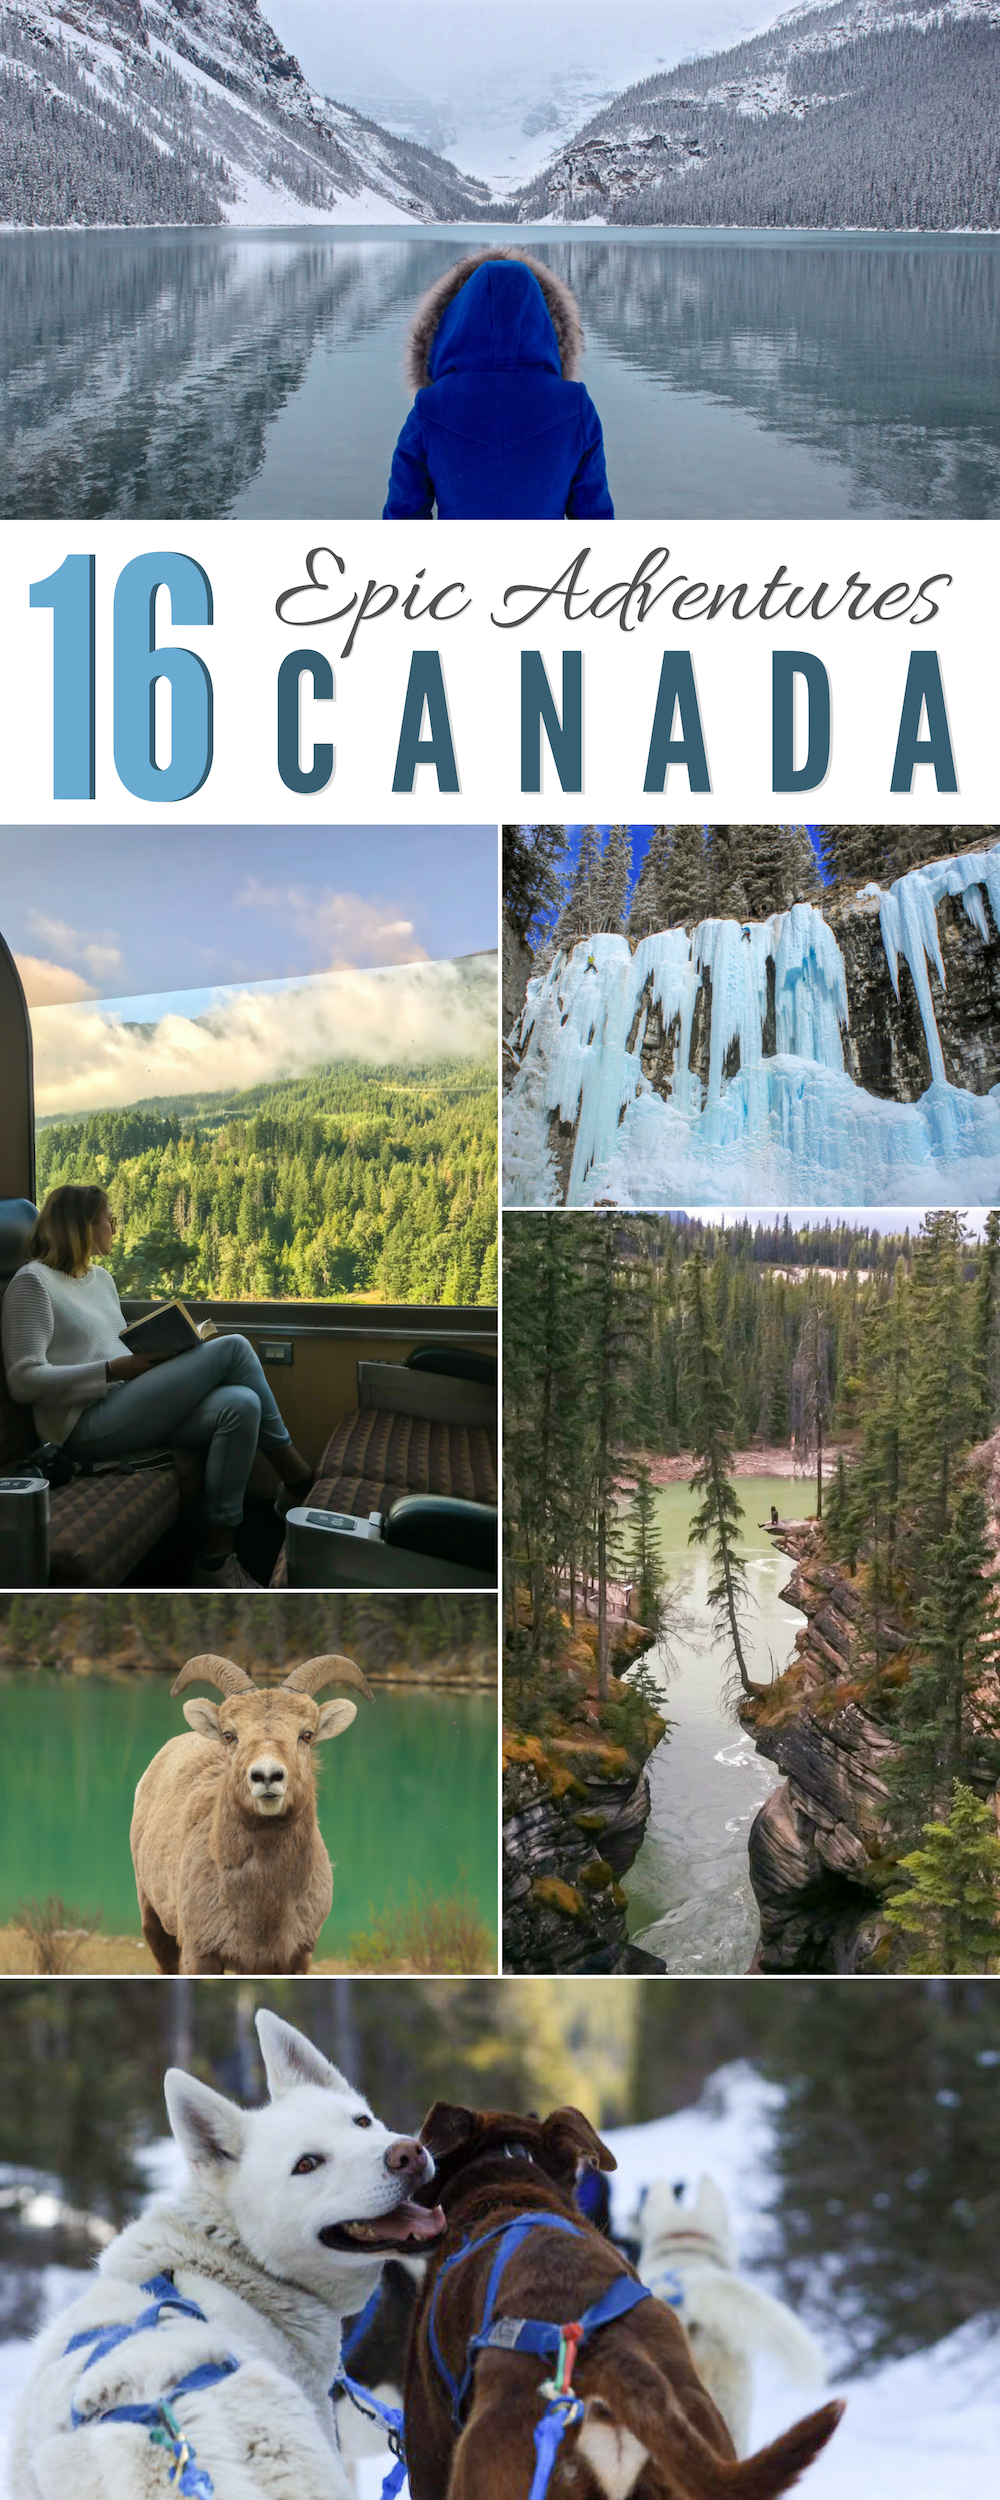 Epic Outdoor Adventures in Canada: Best Things to See & Do